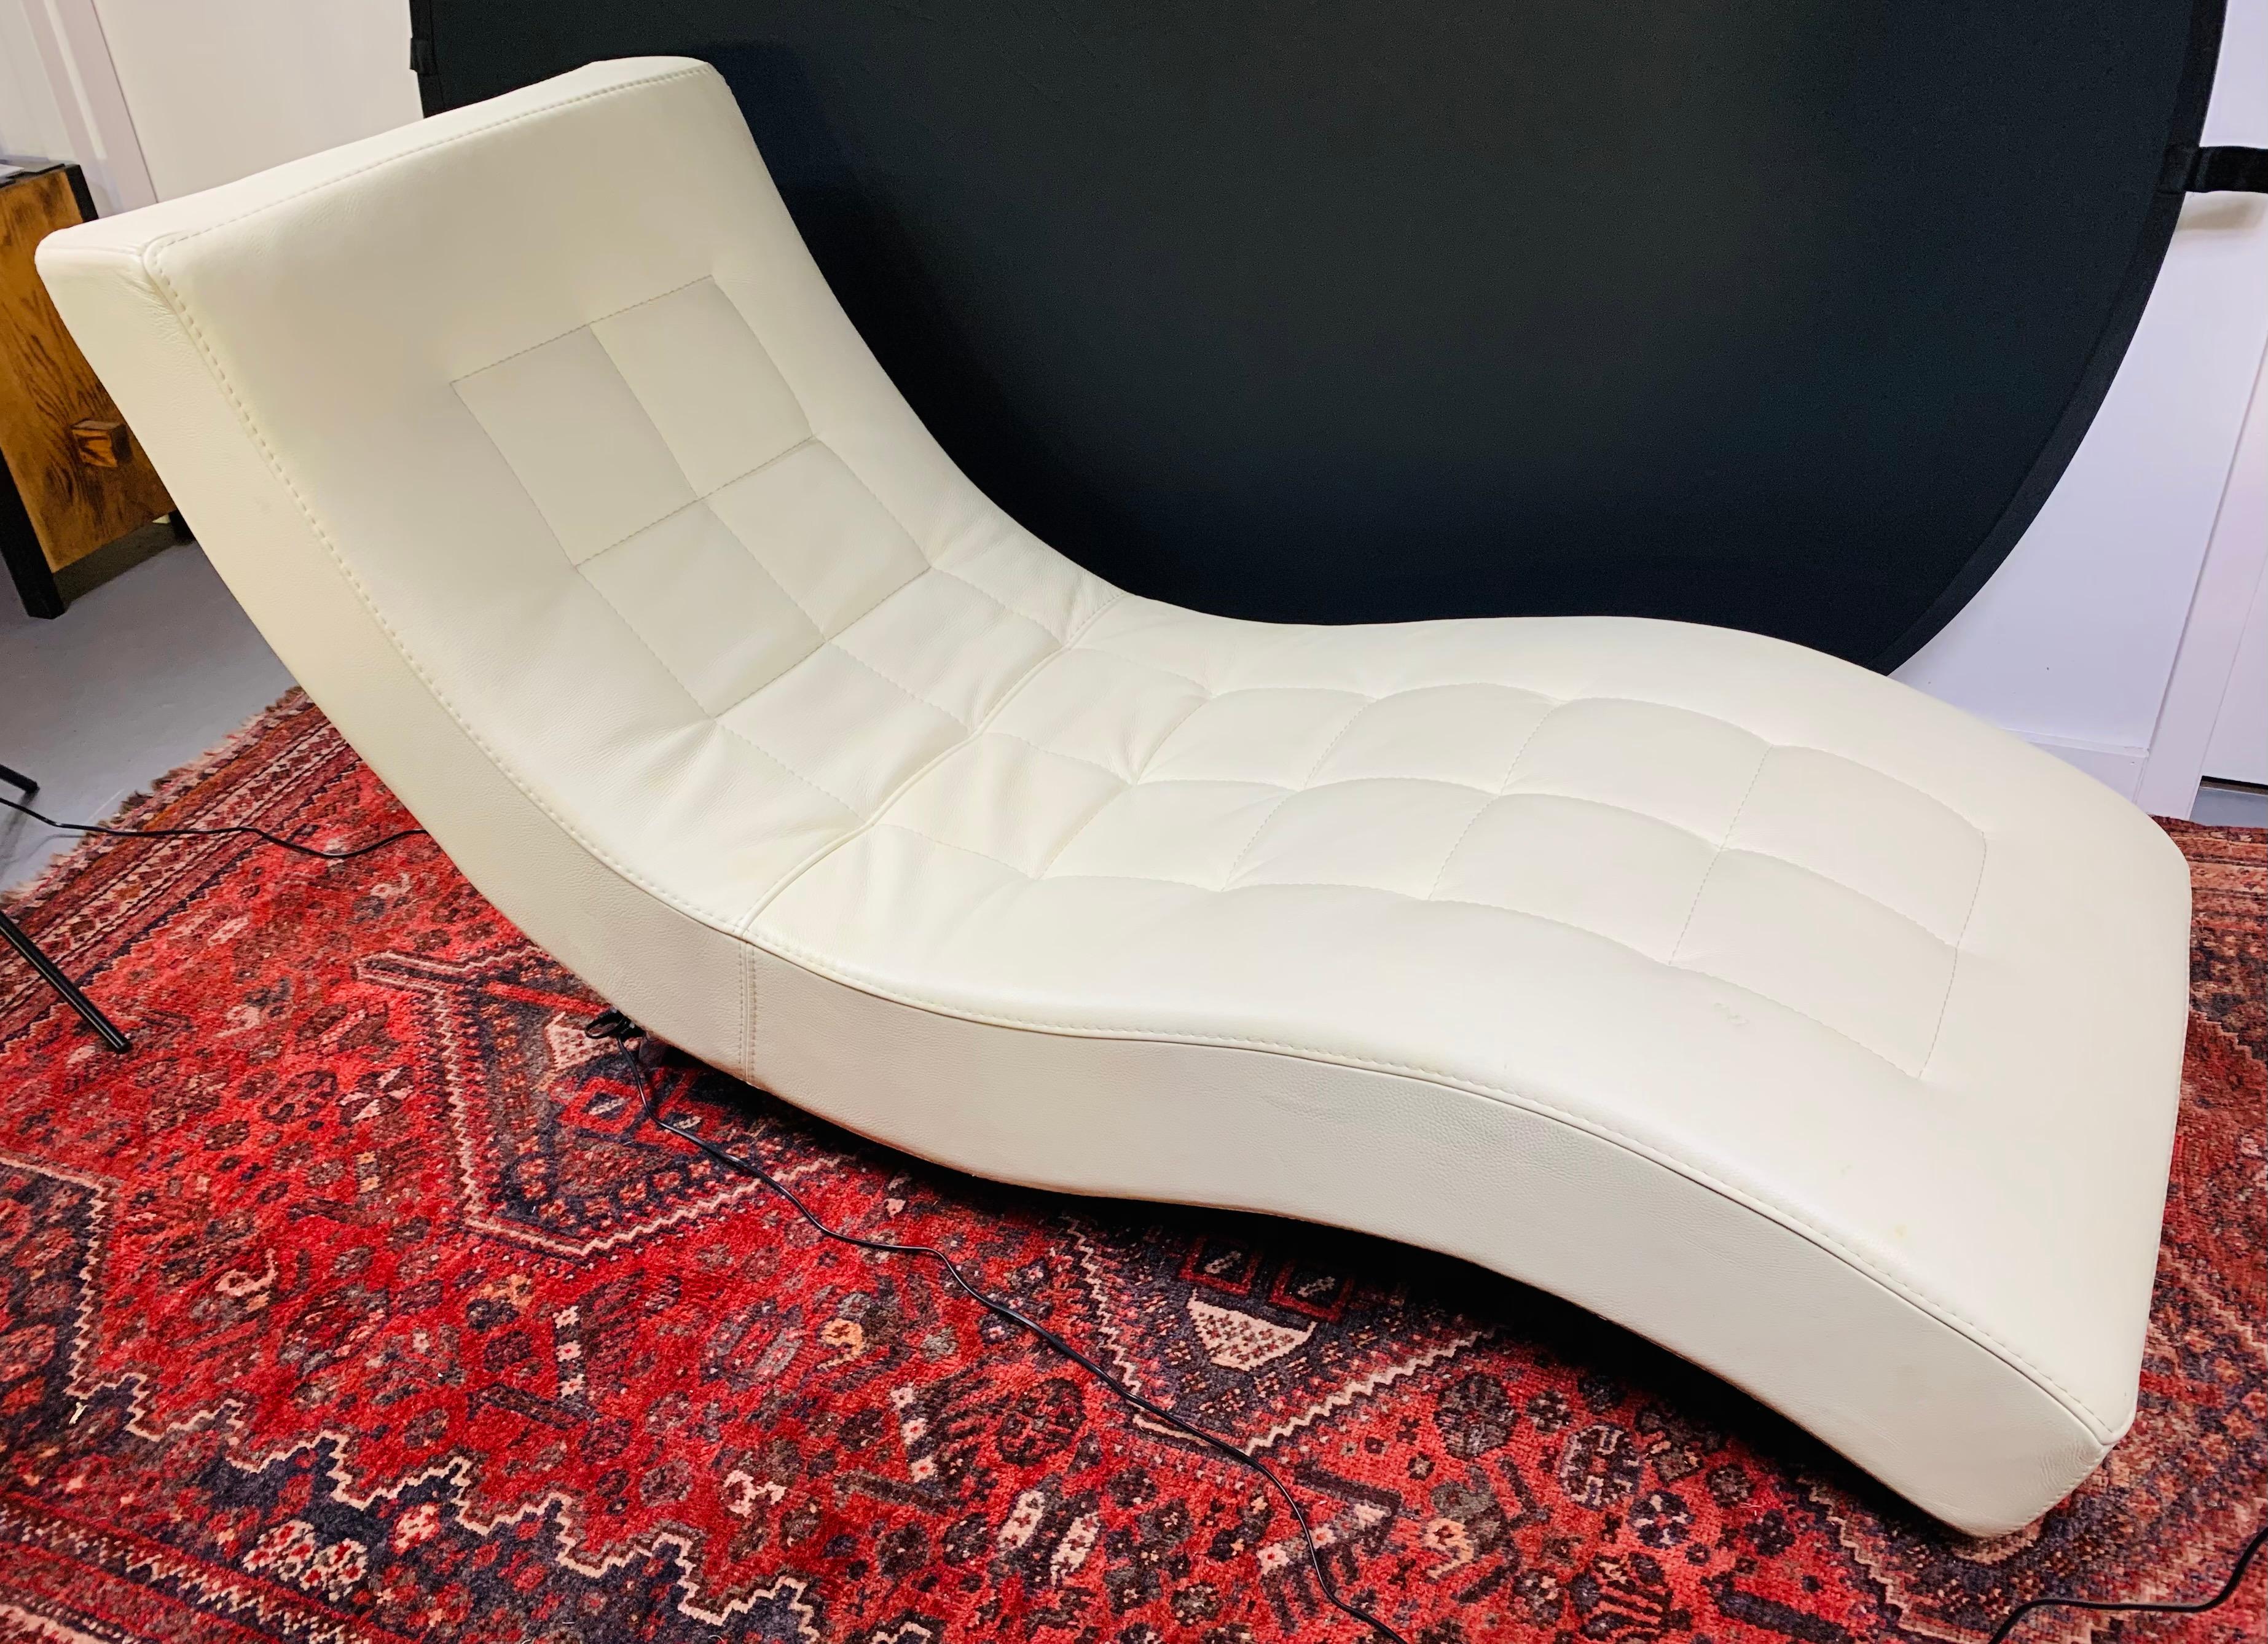 A luxurious and stylish lounge chair signed Maurice Villency in the manner of Roche Bobois. In classy beige or ivory color, the chaise lounge features an elegant curved profile, chrome-plated steel feet and diamond tufted leather. A wonderful